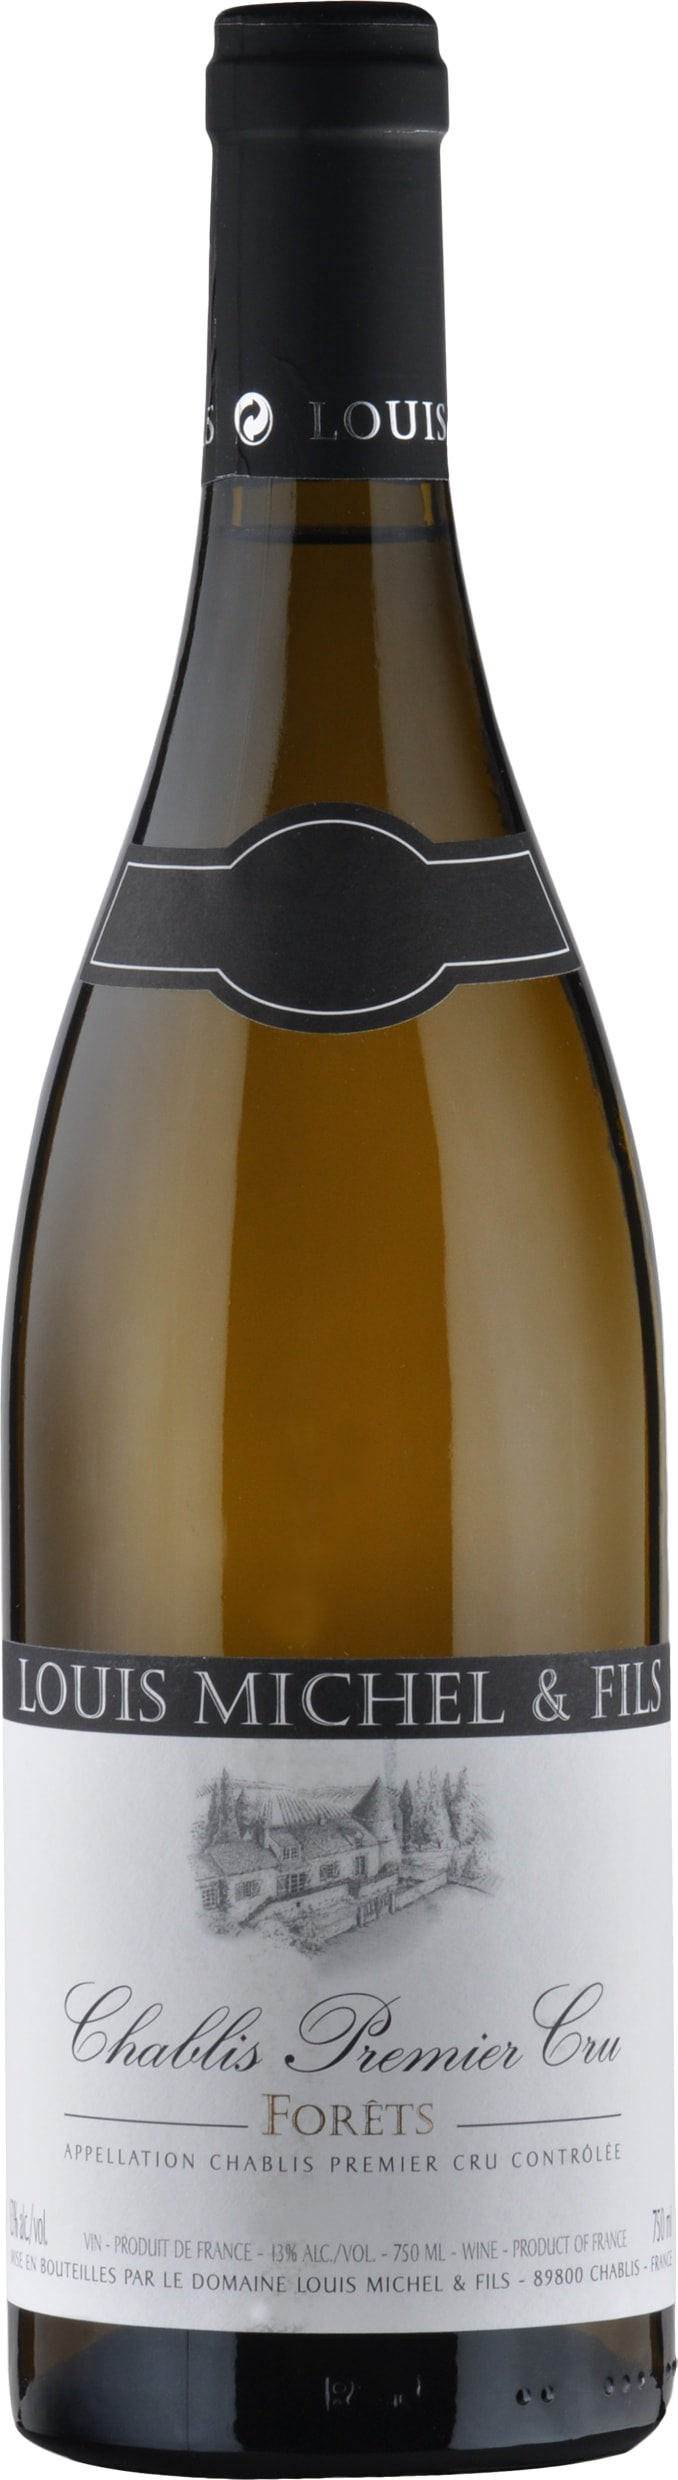 Louis Michel Chablis Premier Cru Forets 2020 75cl - Buy Louis Michel Wines from GREAT WINES DIRECT wine shop